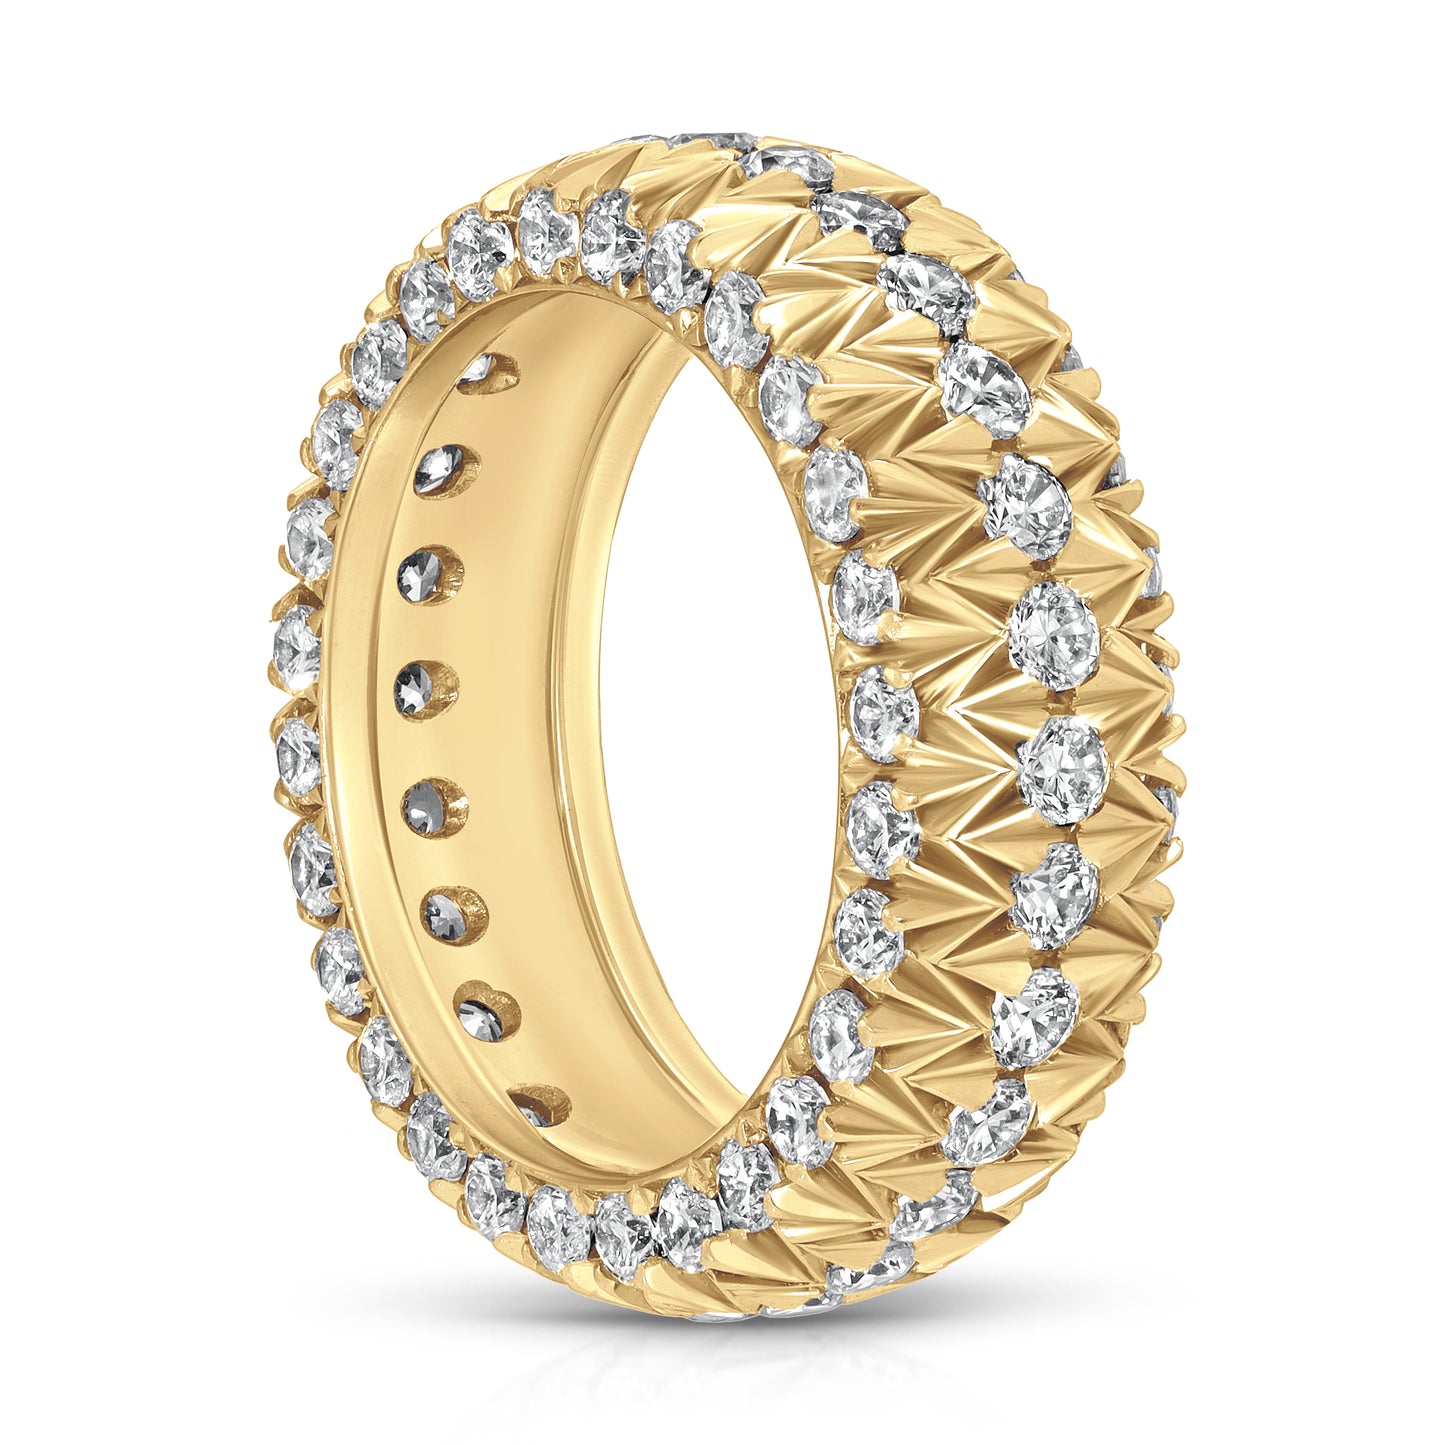 3.2 CTTW Diamond French Pave Ring In 18k Yellow Gold